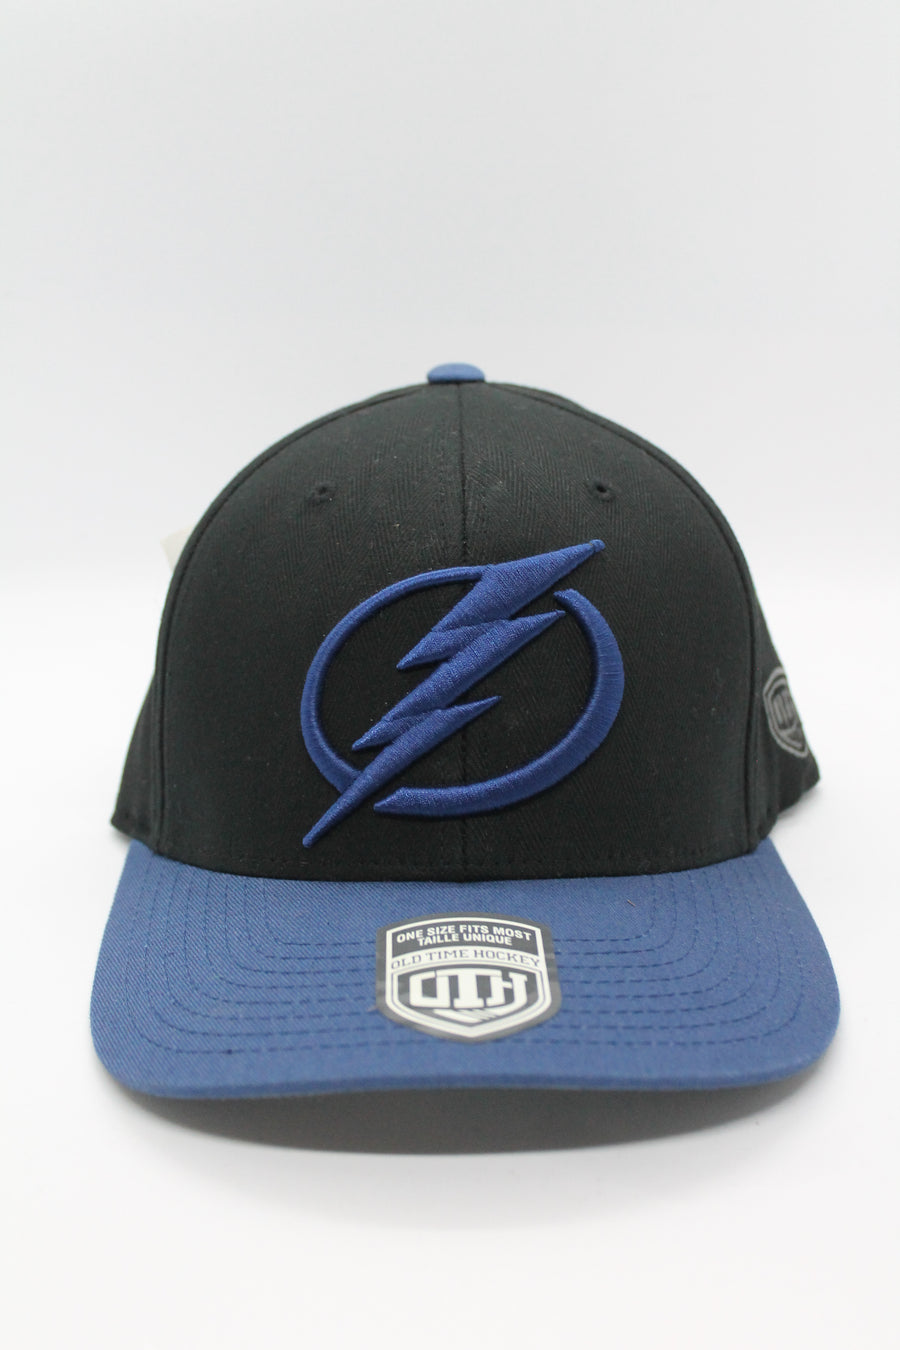 Tampa Bay Lightning clothing - JJ Sports and Collectibles